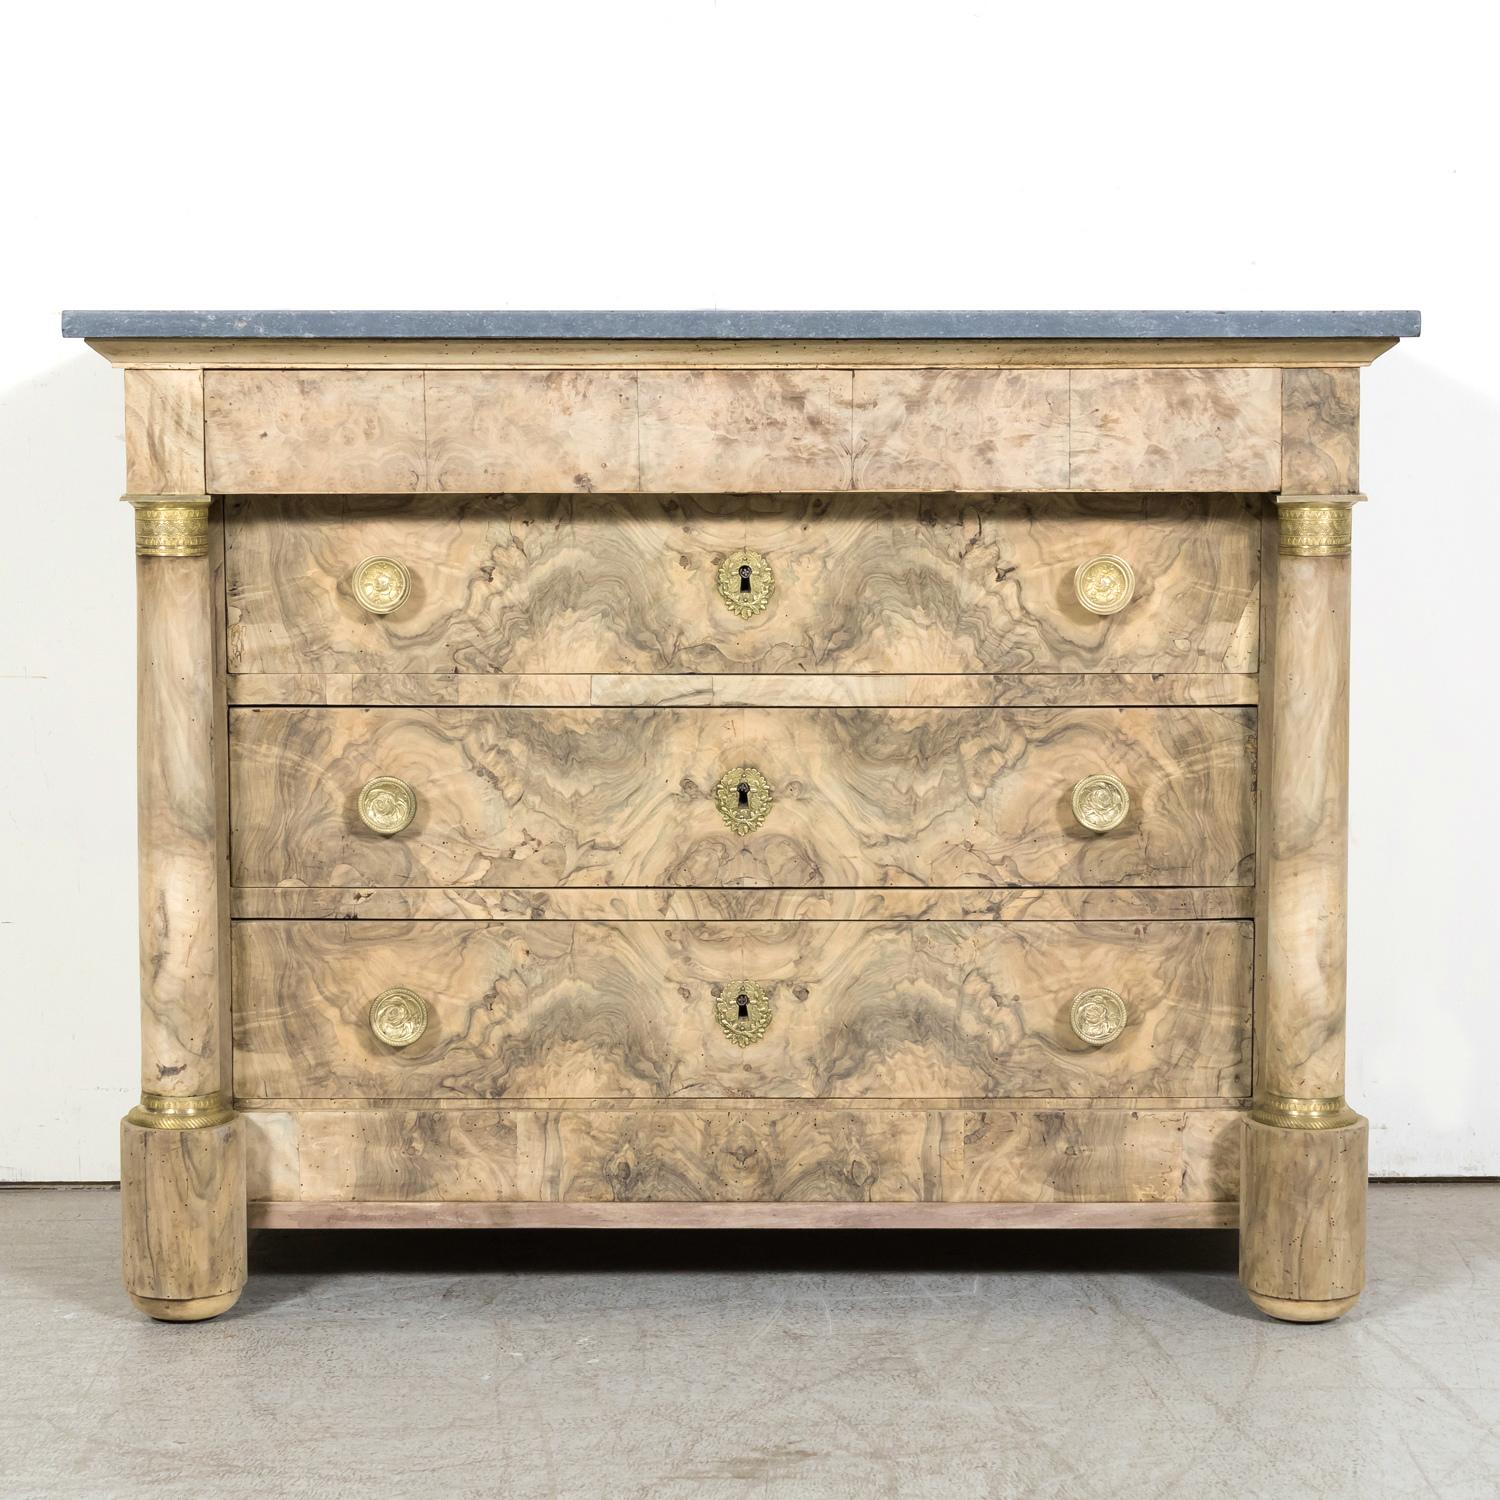 19th Century French Empire Period Bleached Walnut Commode with Marble Top  In Good Condition For Sale In Birmingham, AL